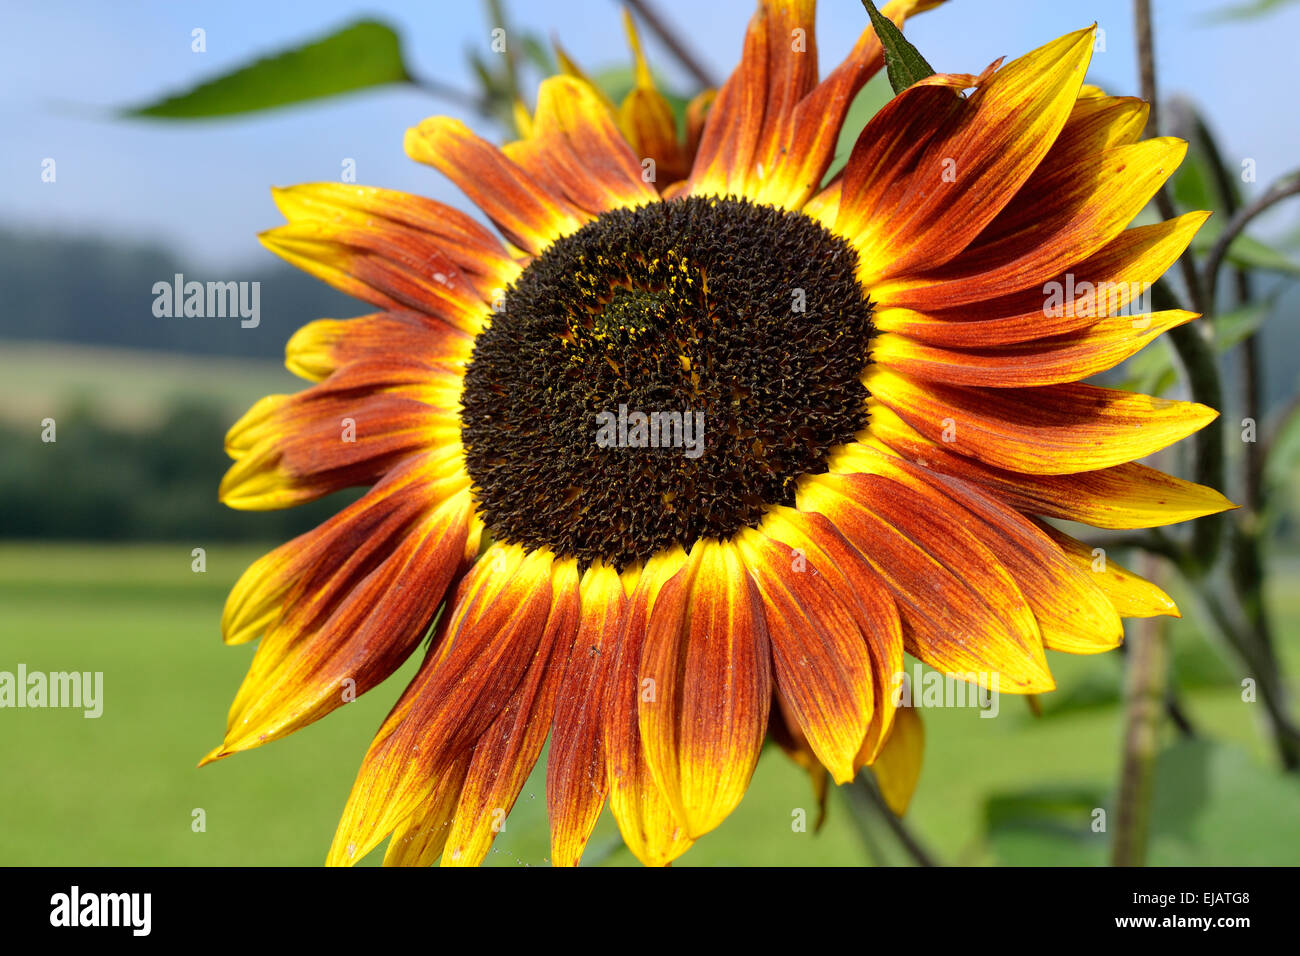 Sunflower Ring Of Fire High Resolution Stock Photography and Images - Alamy